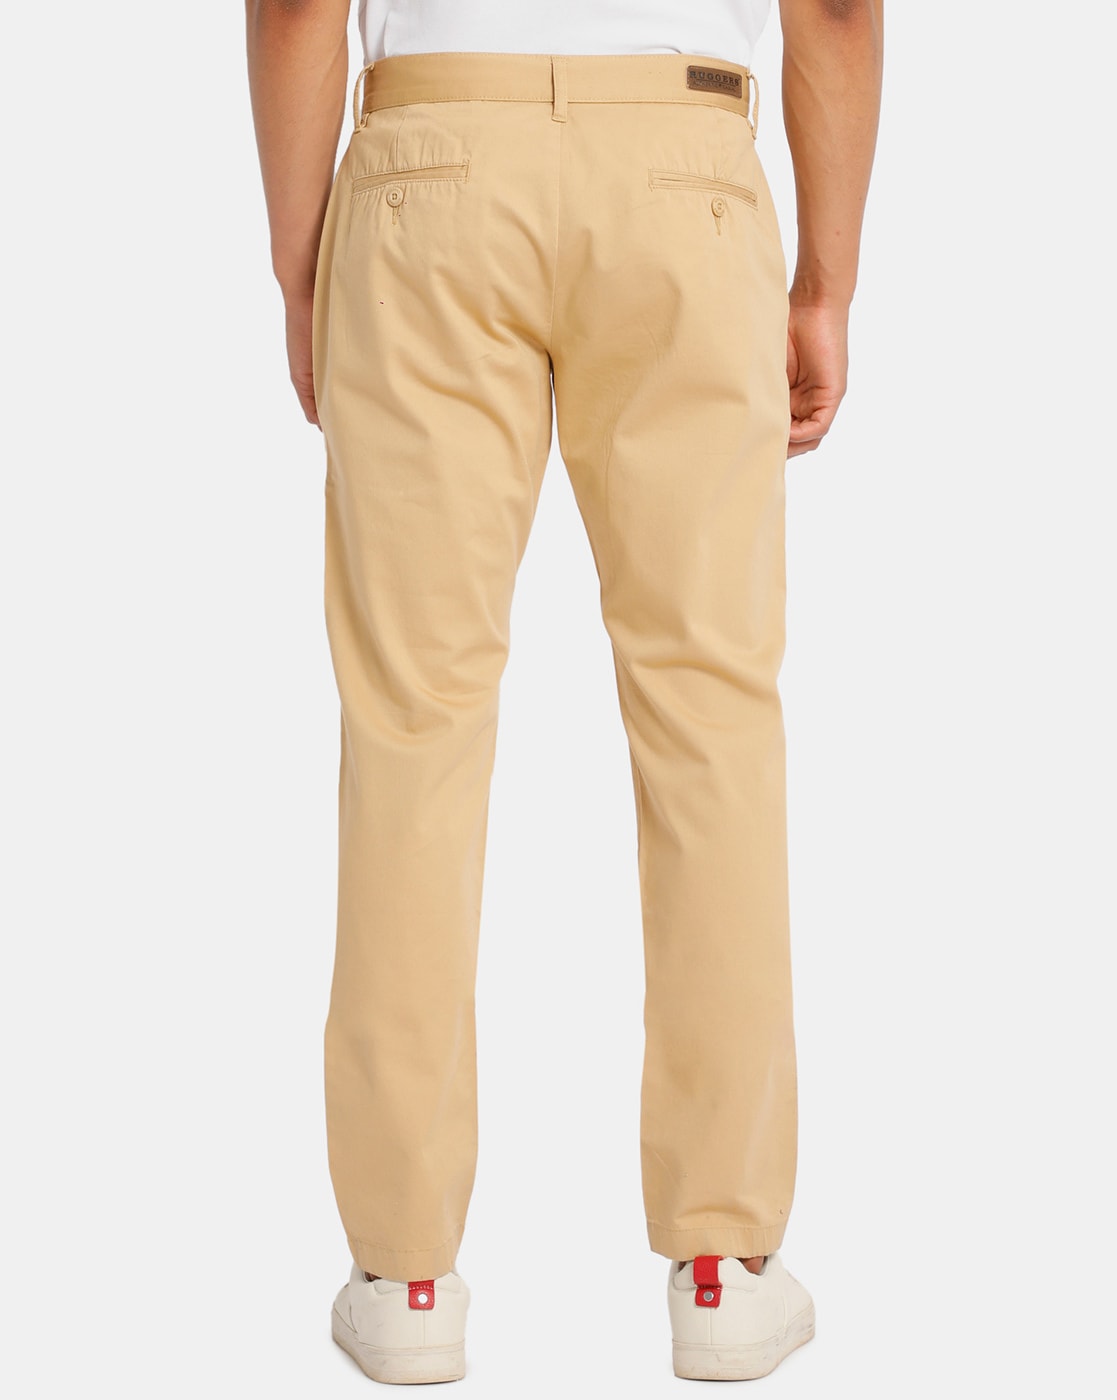 Buy RUGGERS Solid Cotton Slim Fit Mens Casual Trousers  Shoppers Stop